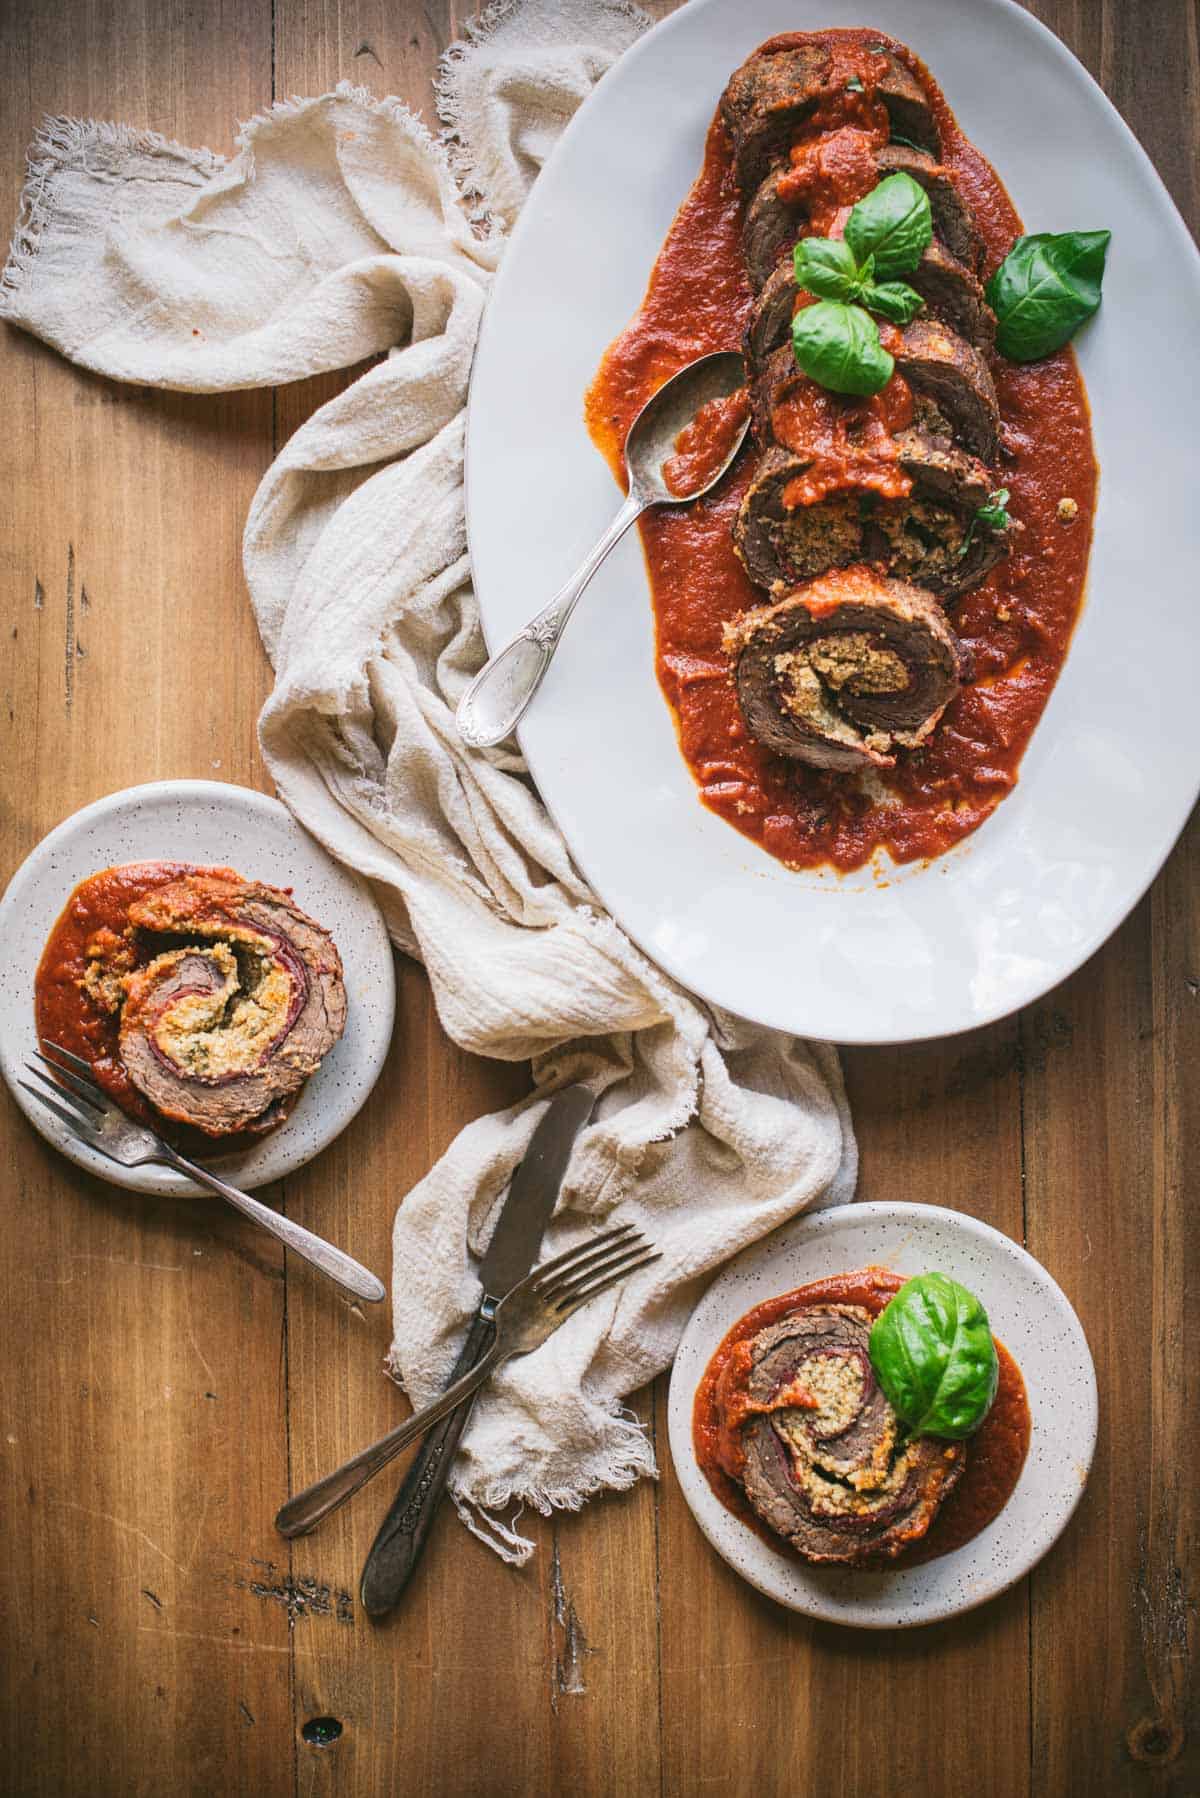 Italian Beef braciole on a bed of tomato sauce on a white plate. The braciole is sliced into pieces and topped with fresh herbs.
There are 2 smaller white plates on top of the wooden table. Each plate has a slice of braciole and tomato sauce on top. There is some discarded cutlery sitting on the table too.